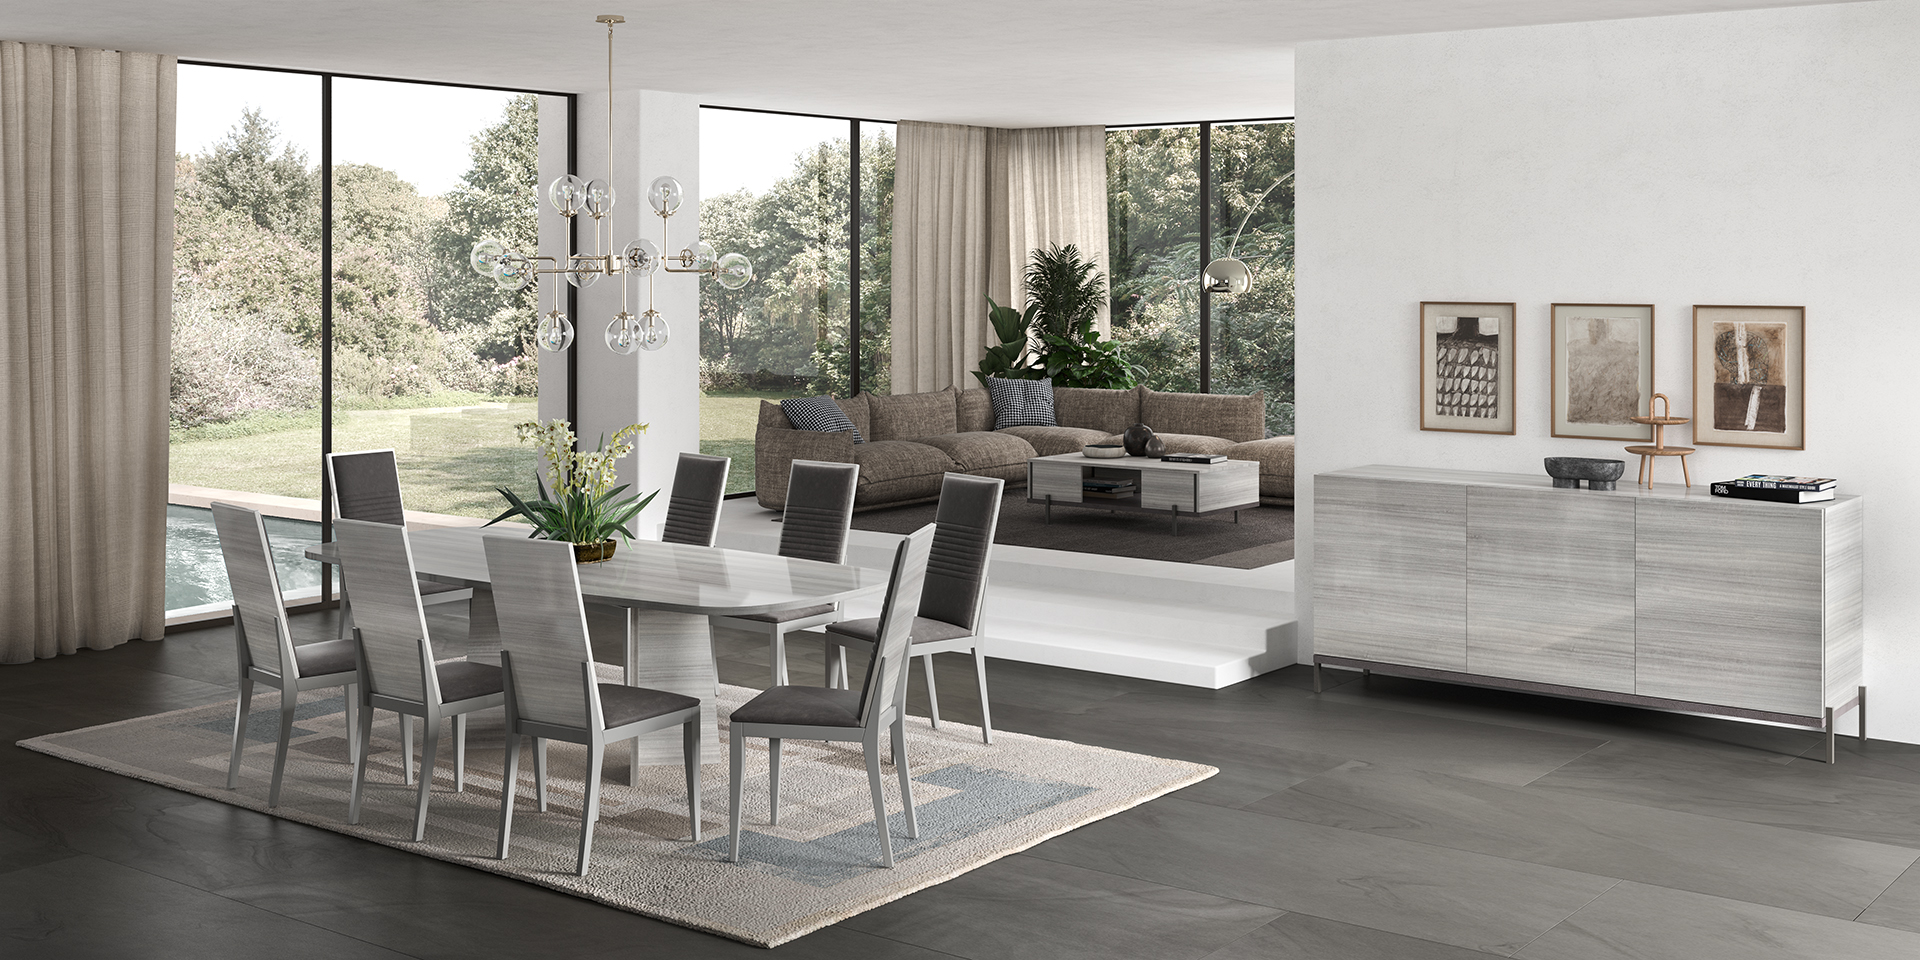 Dining Room Furniture Modern Dining Room Sets Mia Dining room Additional items